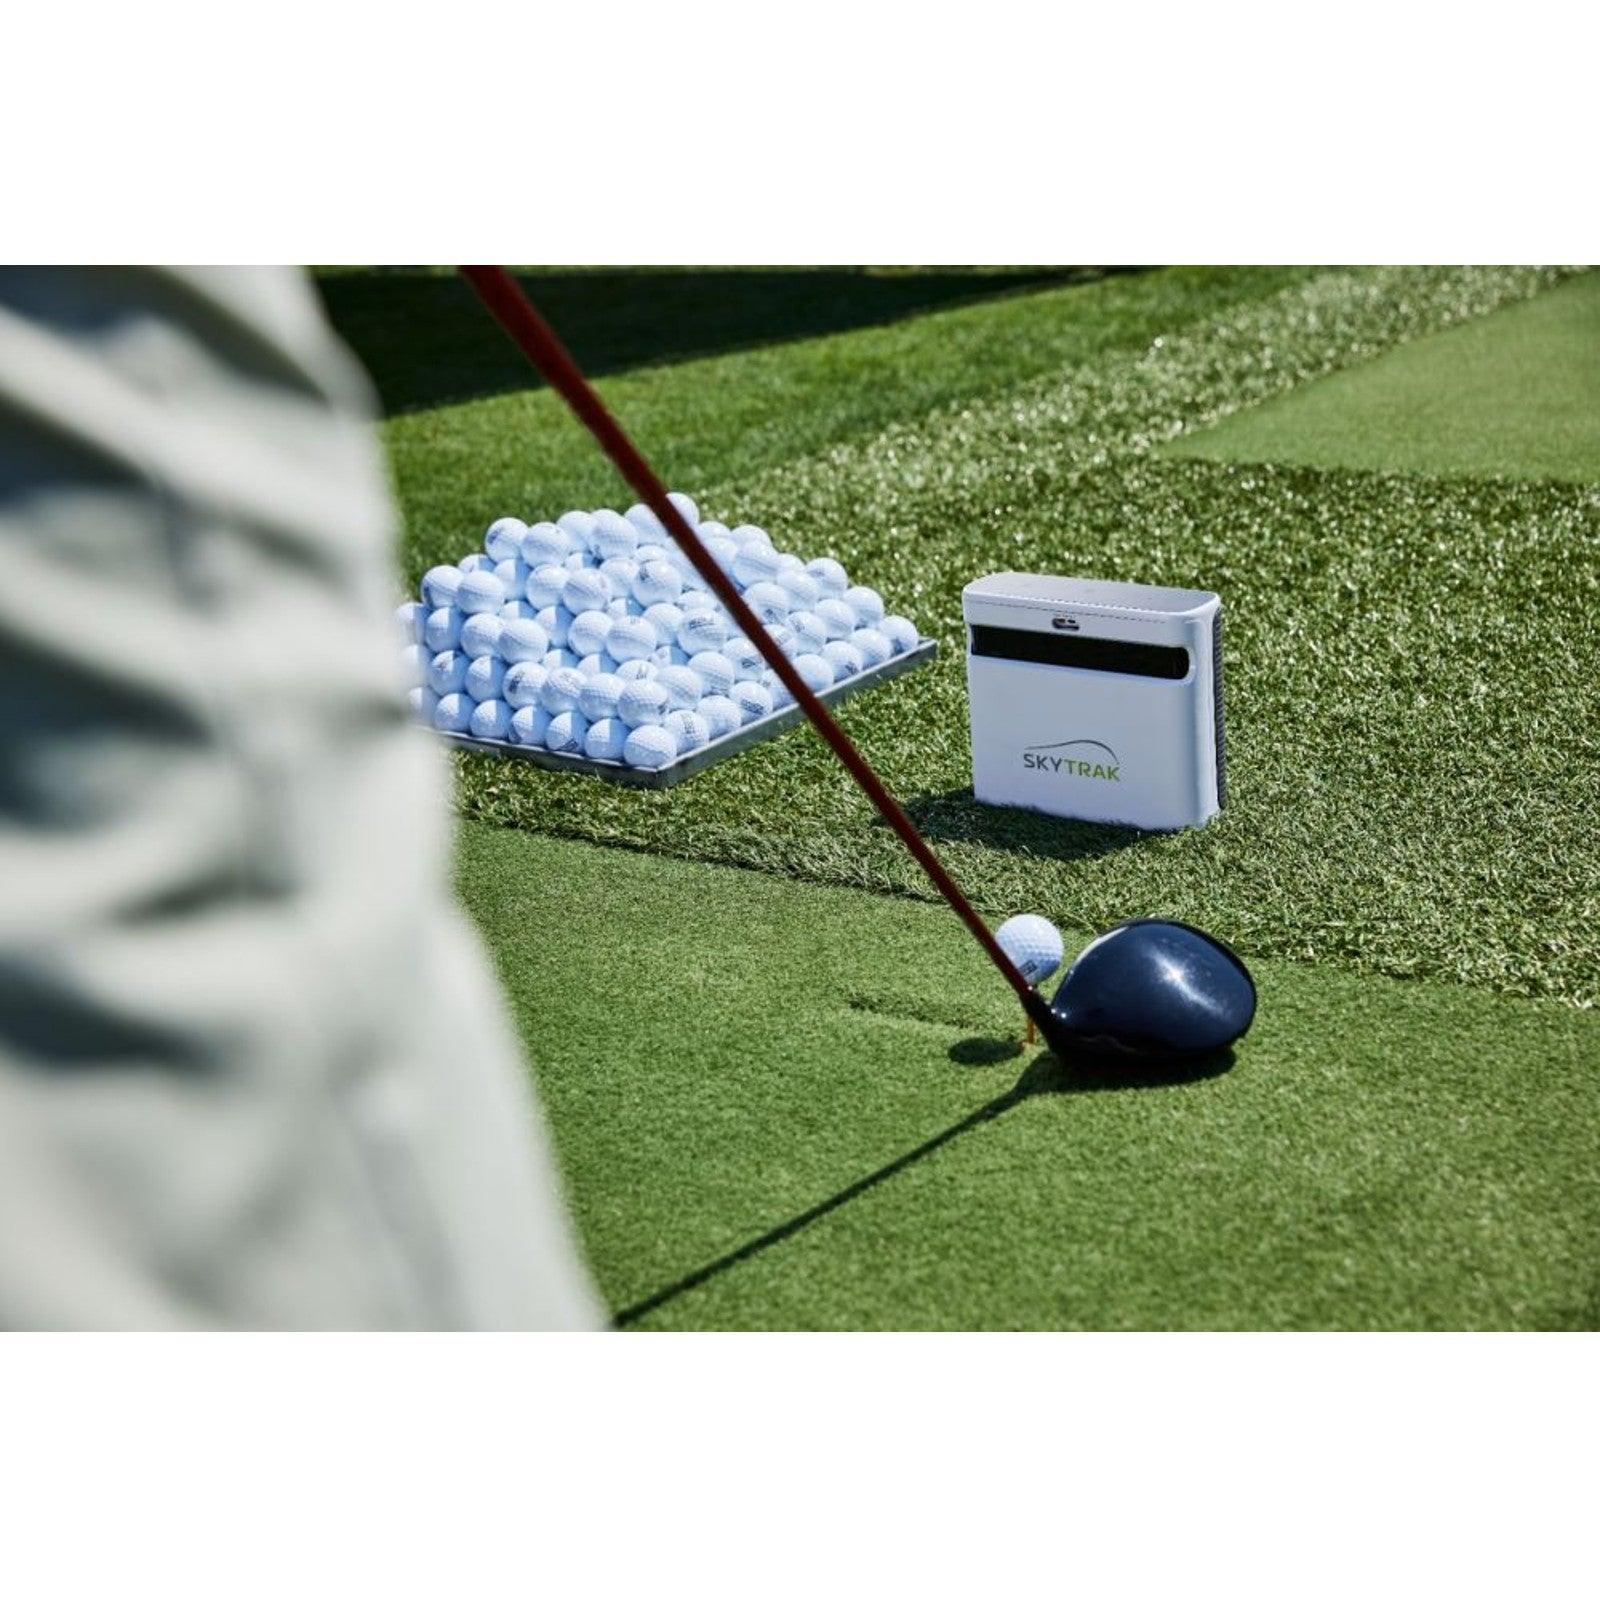 Is It Worth Buying a Launch Monitor? - Simply Golf Simulators